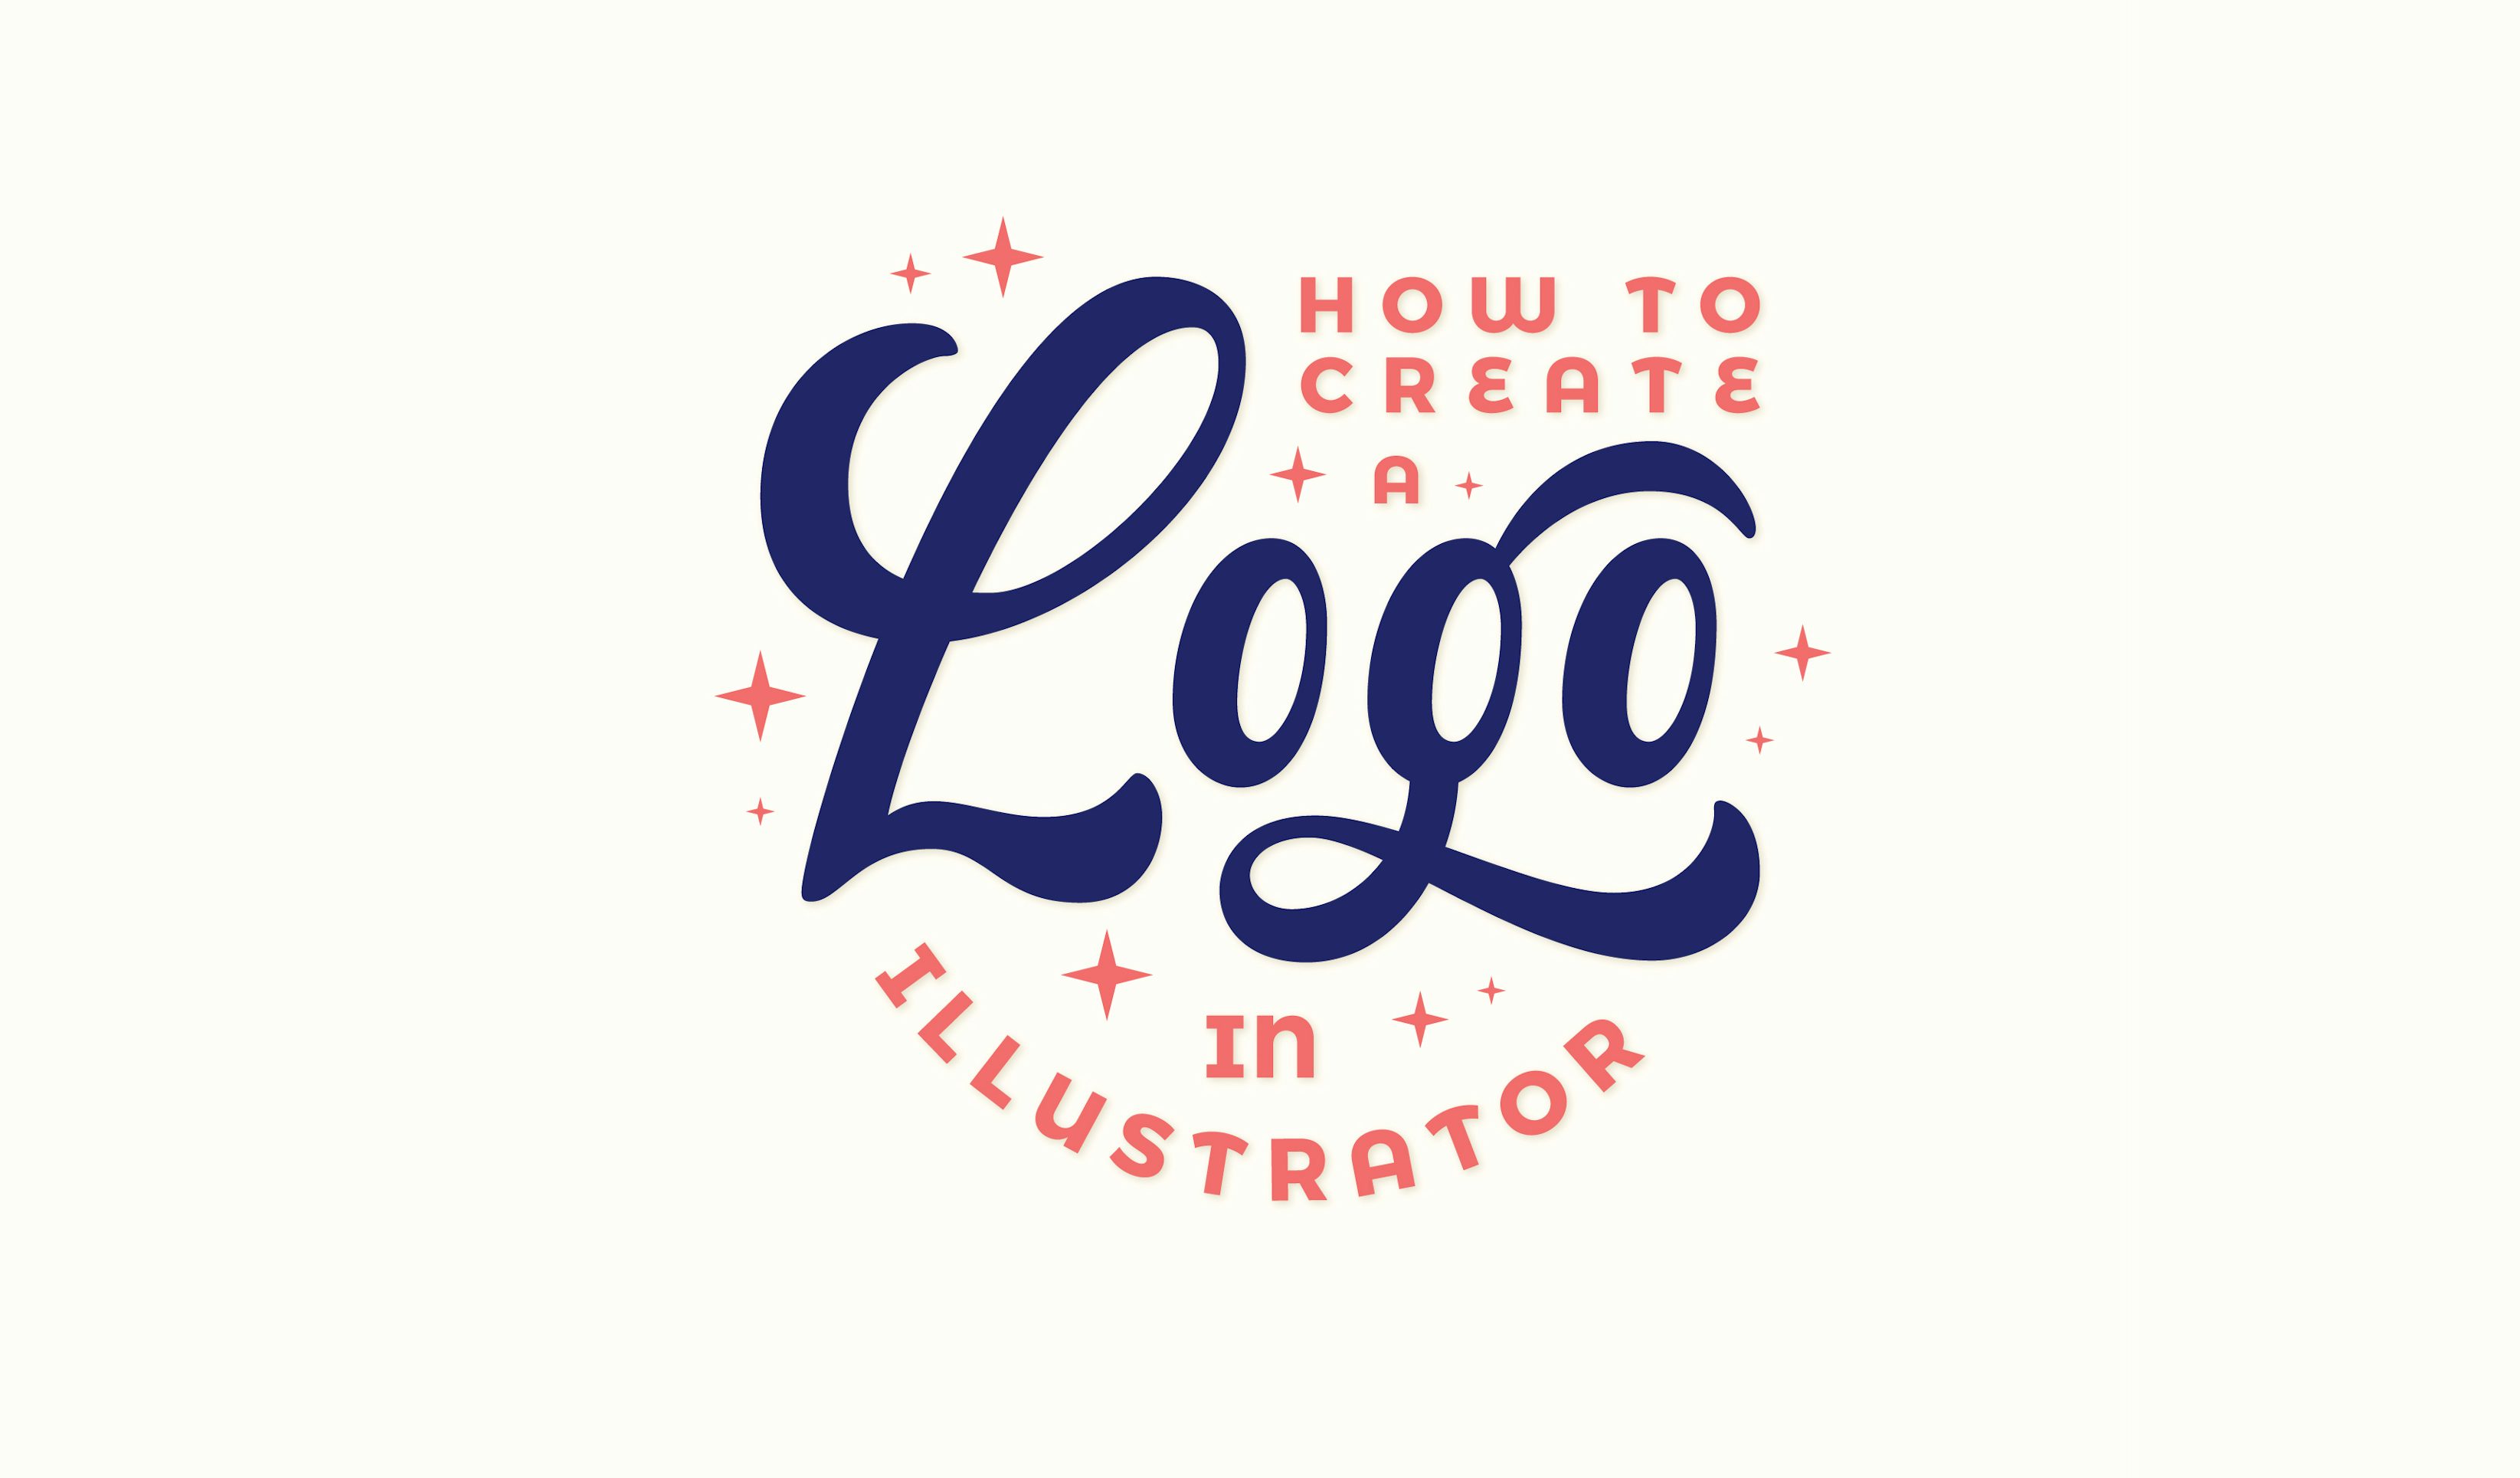 How to make a logo in Illustrator - Your guide to an Illustrator logo